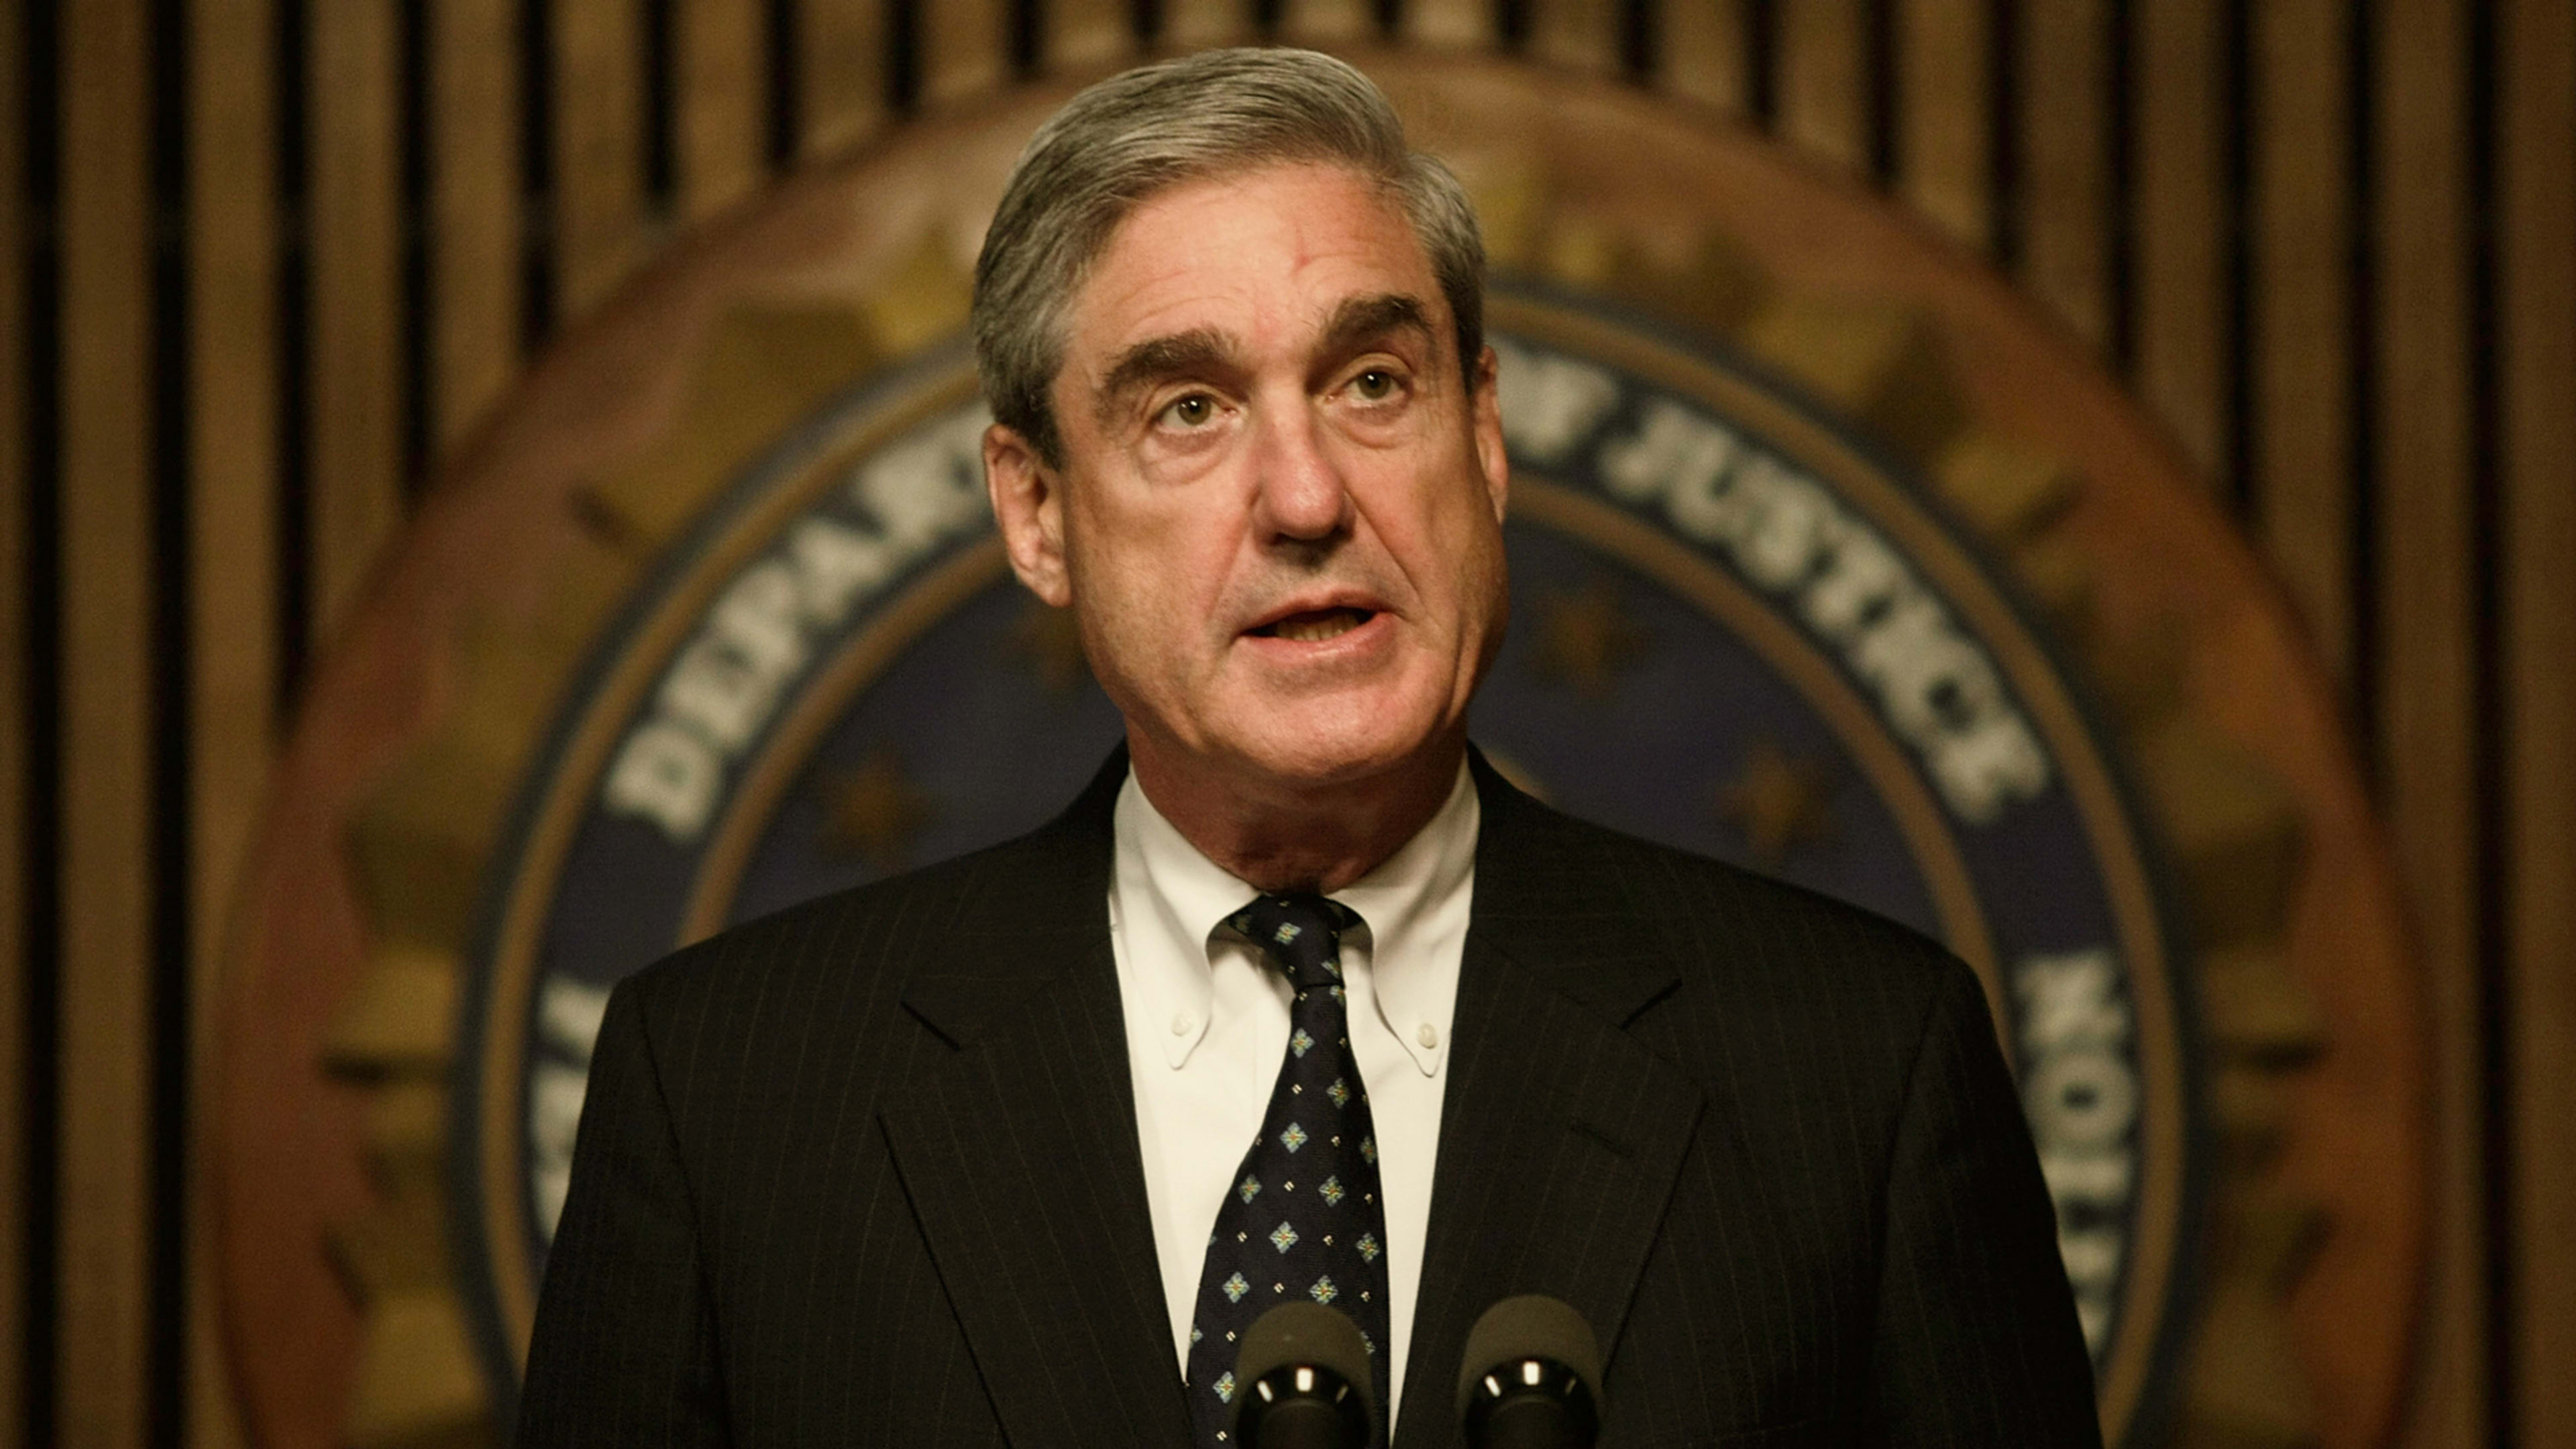 Watch live: Robert Mueller gives first public statement about Russian Interference